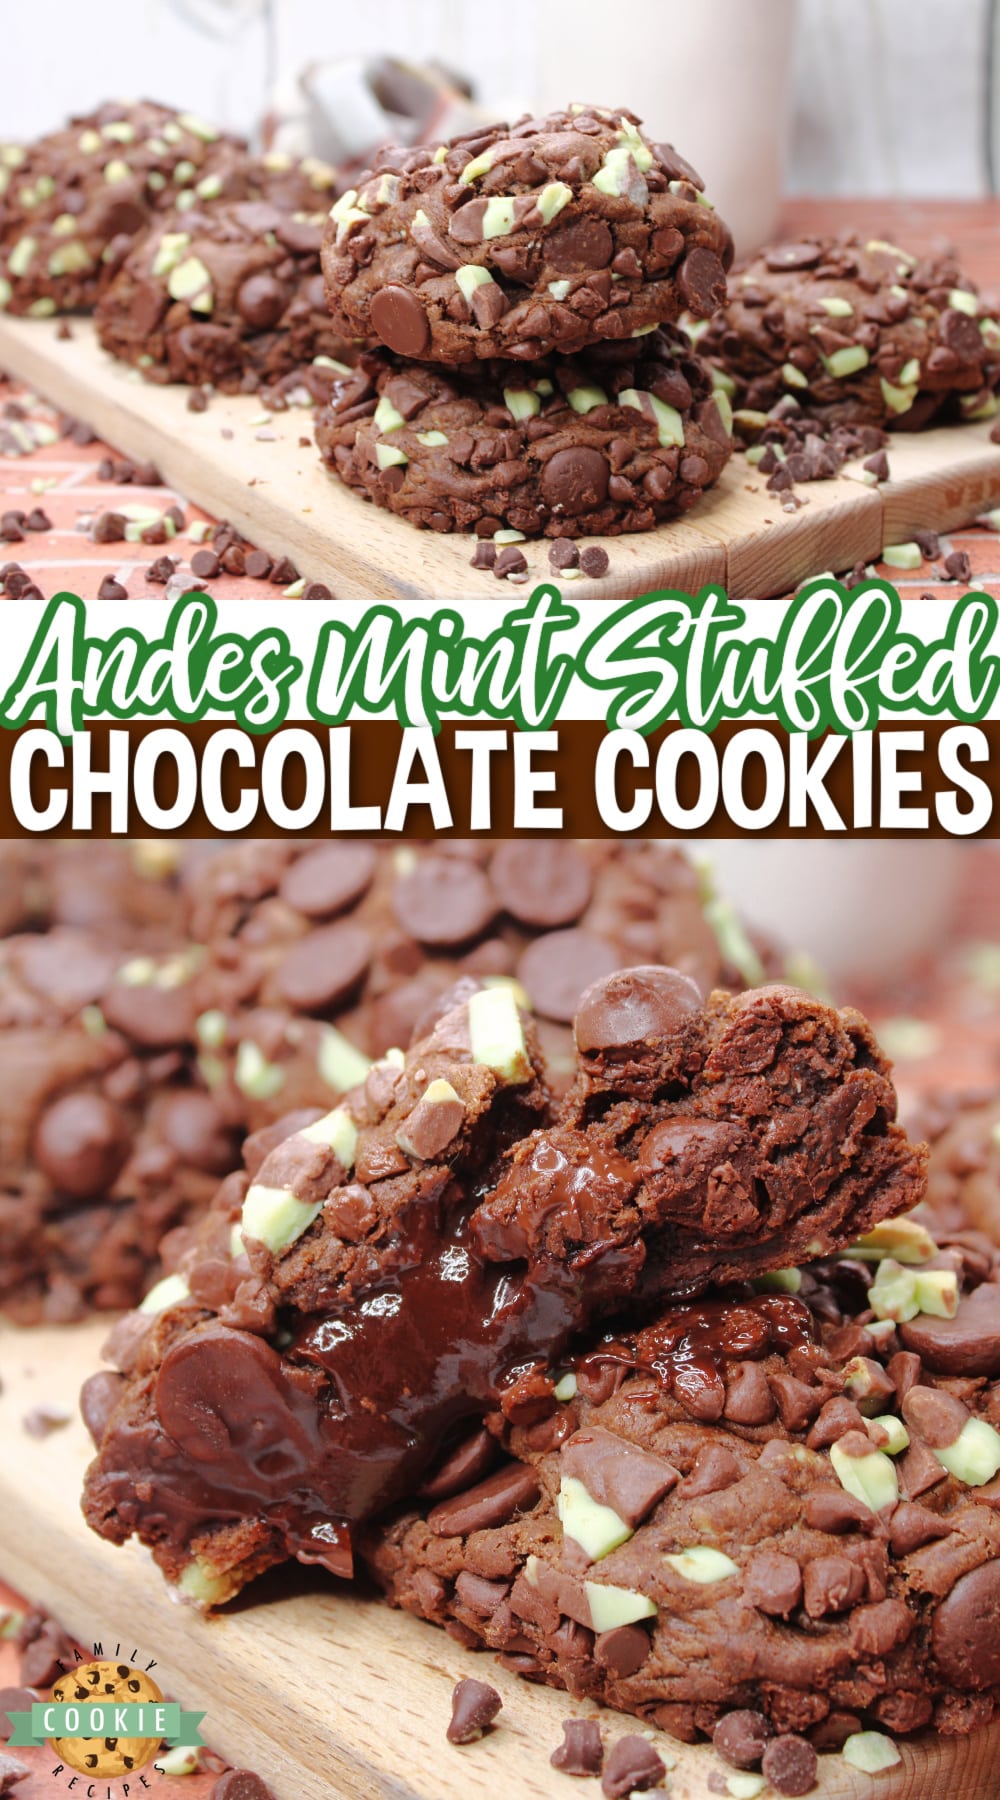 Andes Mint Stuffed Chocolate Cookies are rich chocolate mint cookies that are filled with chocolate ganache and a grasshopper cookie in the middle. Tons of mint flavor in this amazing chocolate cookie recipe! via @buttergirls